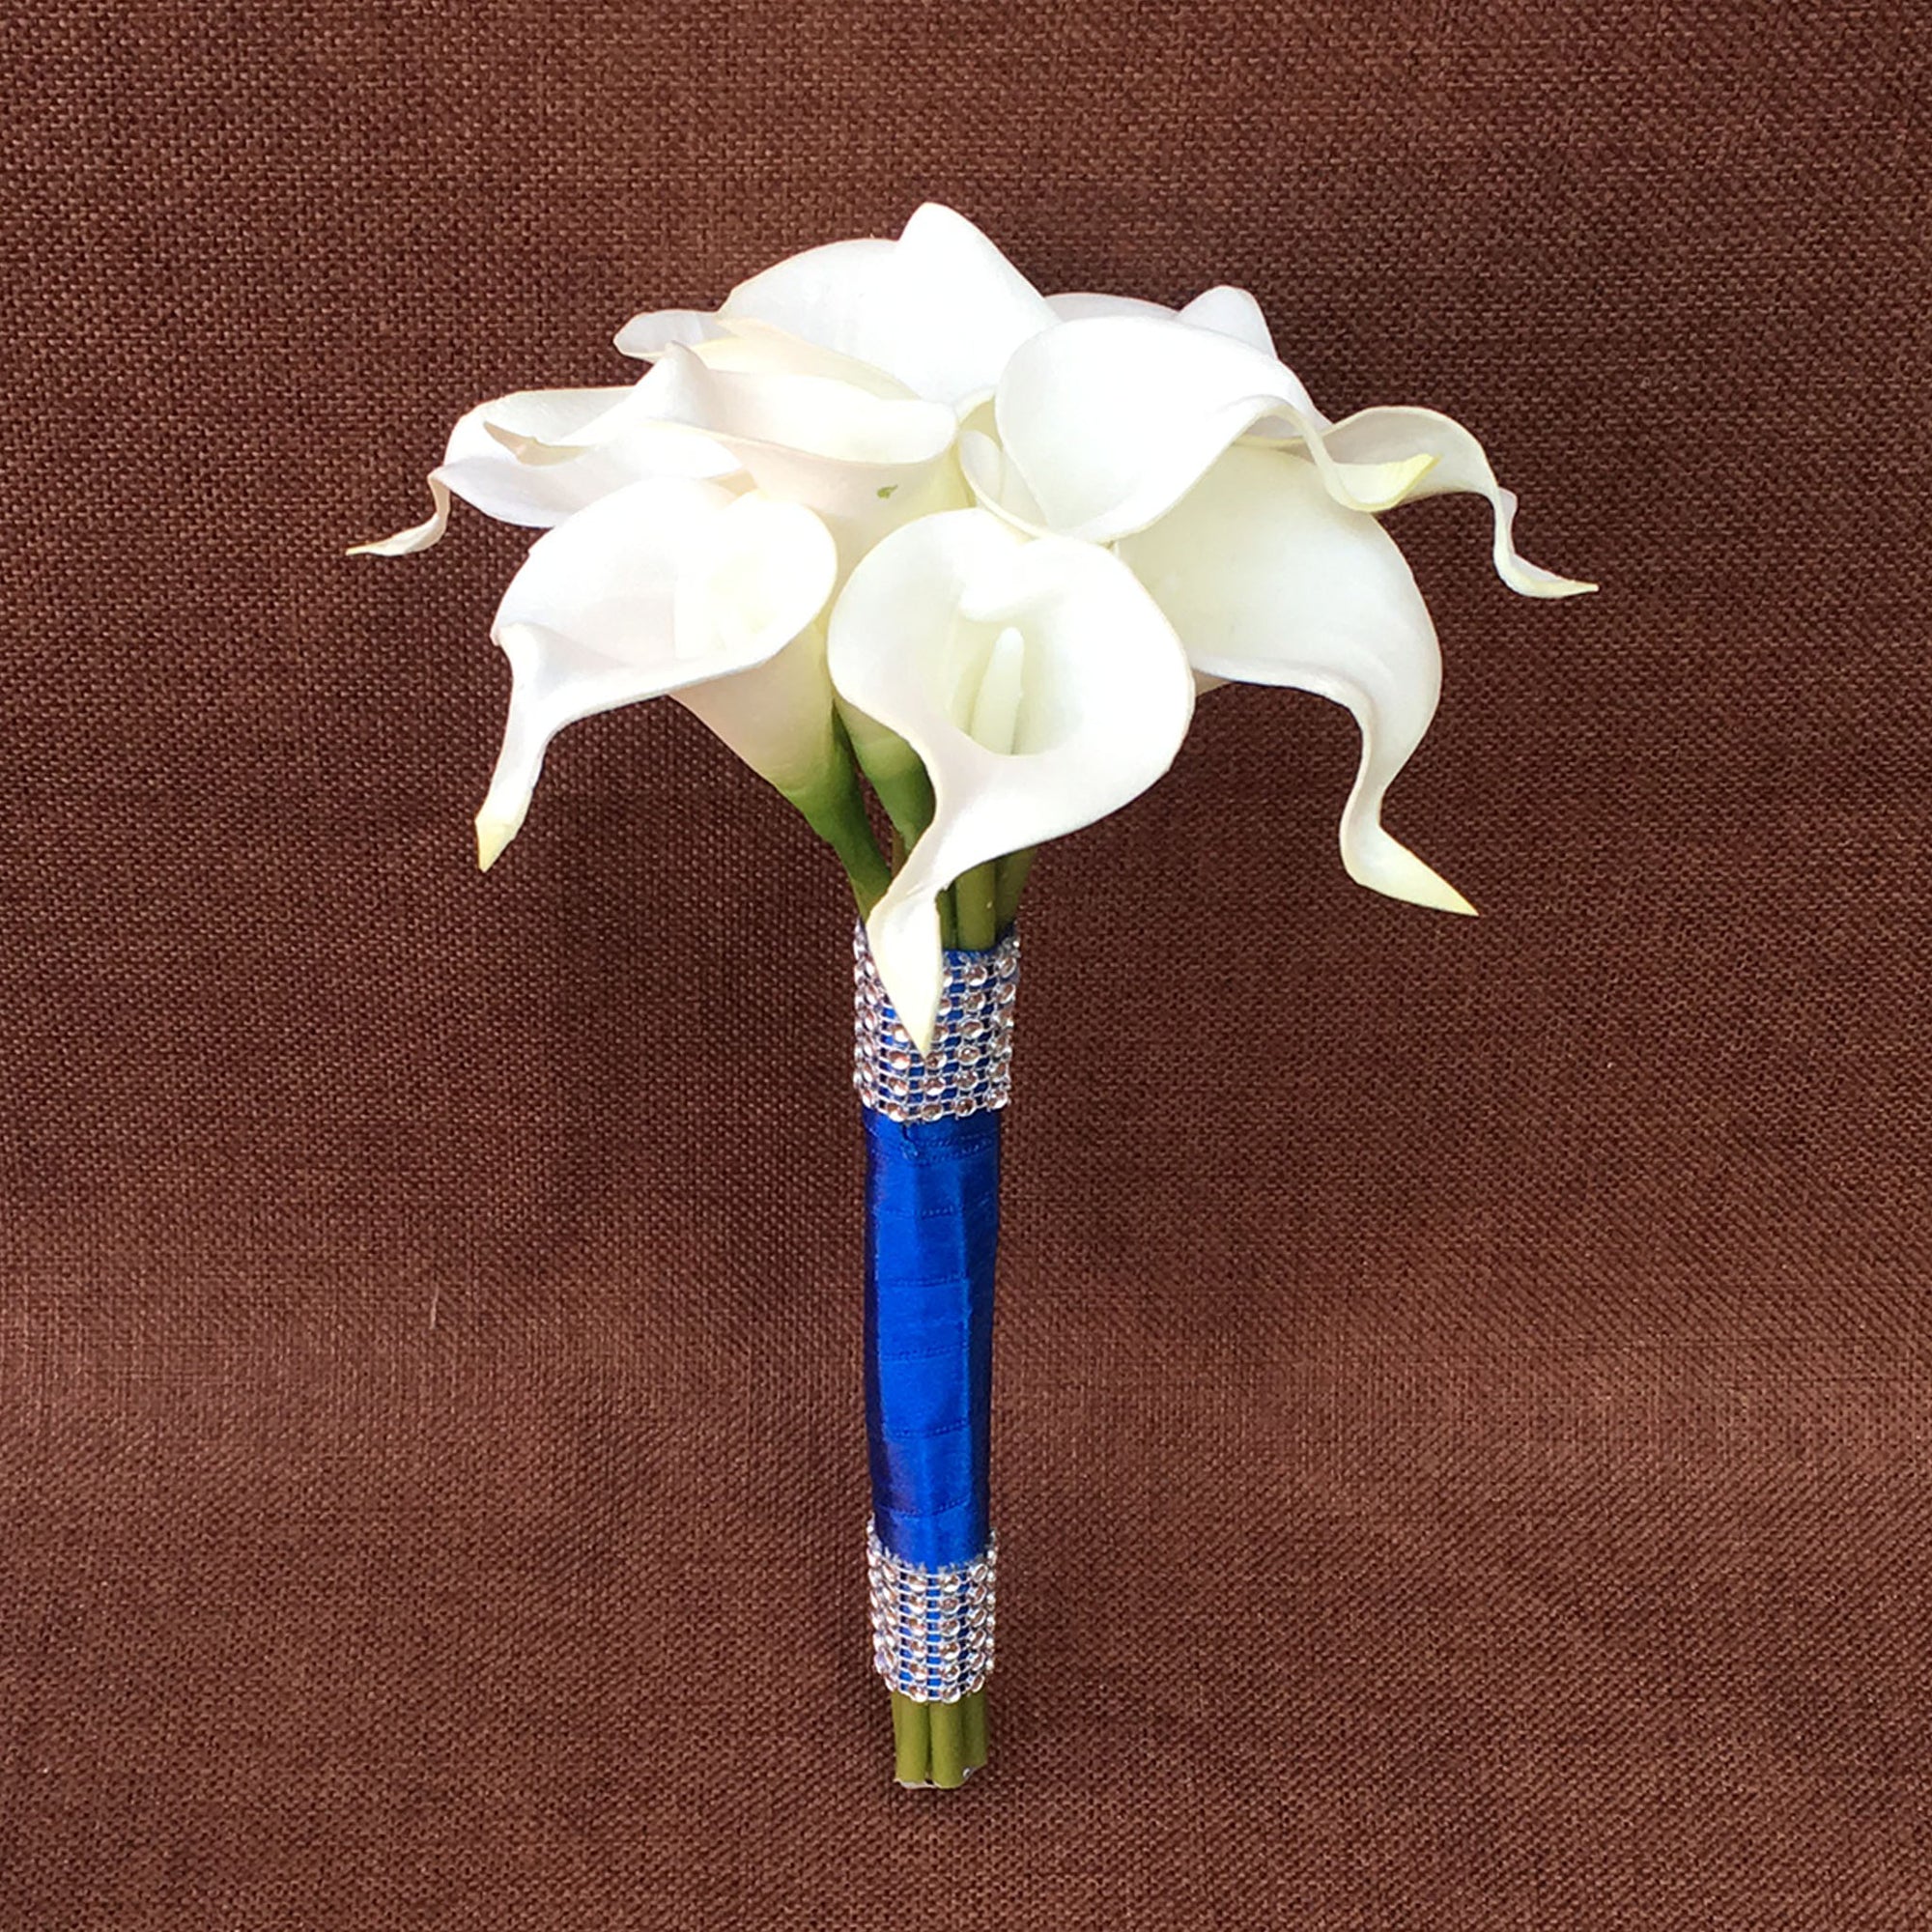 Flower Bouquet for Bridal Bridesmaid Picasso Blue White Calla Lily